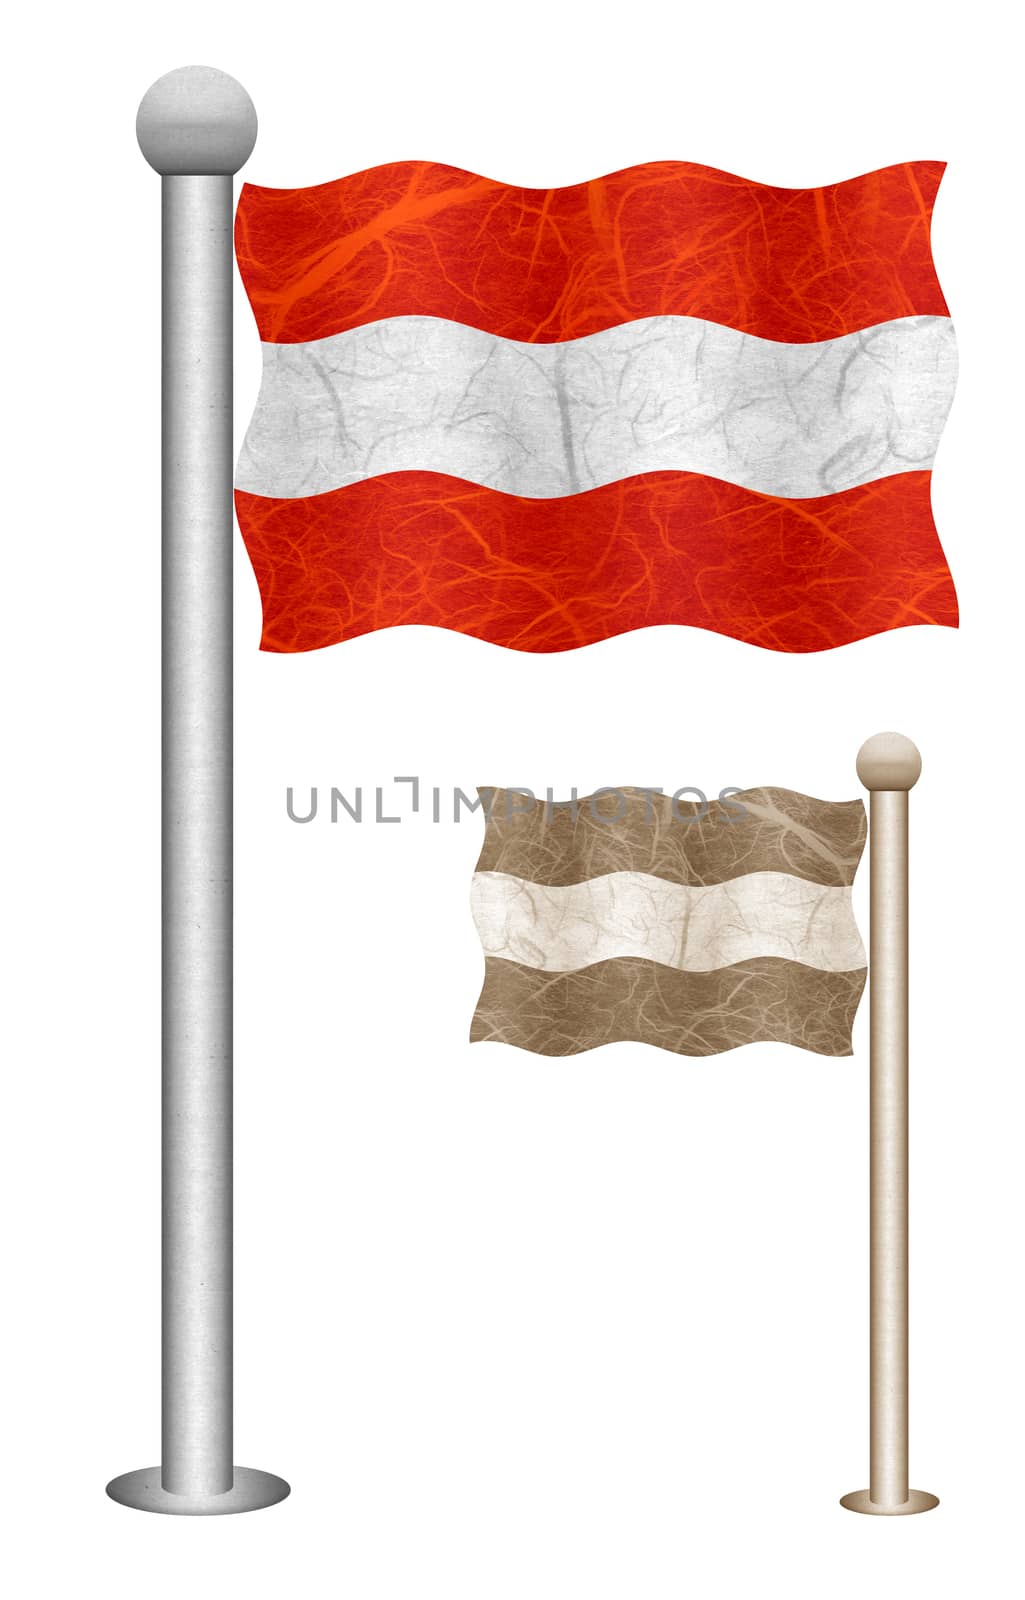 Austria flag waving on the wind. Flags of countries in Europe. Mulberry paper on white background.